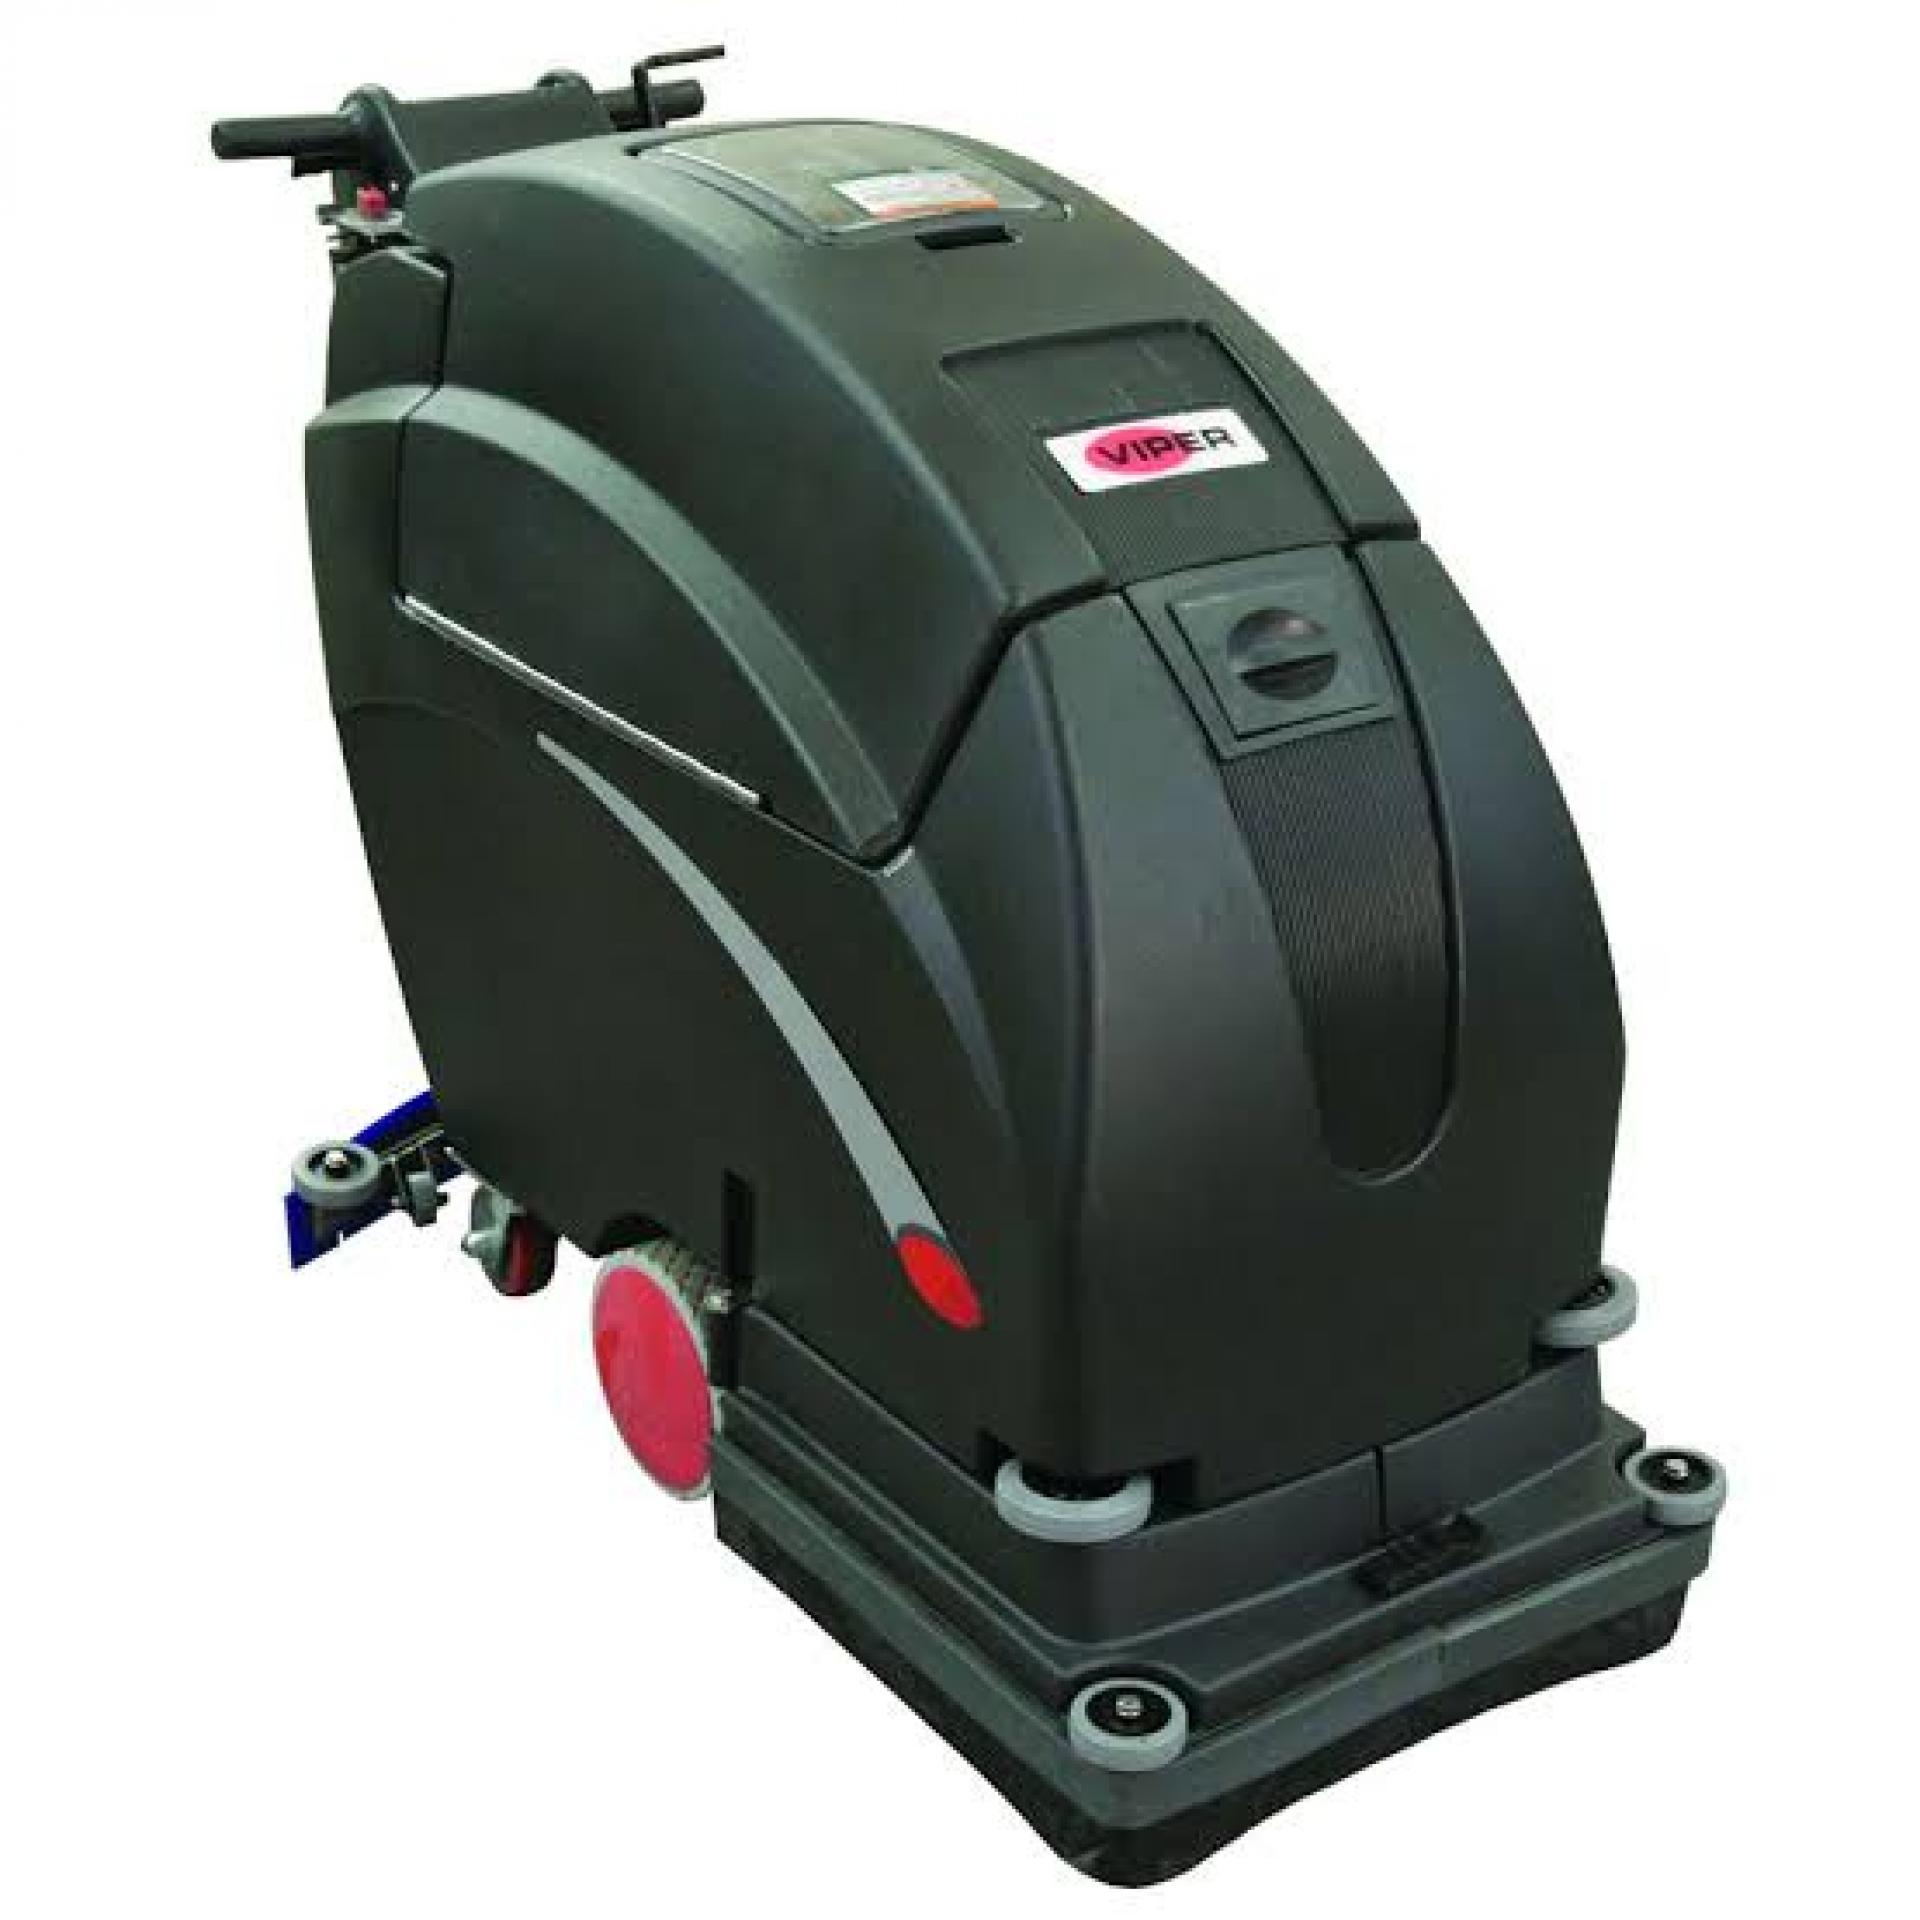 Viper battery operated floor scrubber FANG26T Commercial Cleaning Supplies Auckland Counties